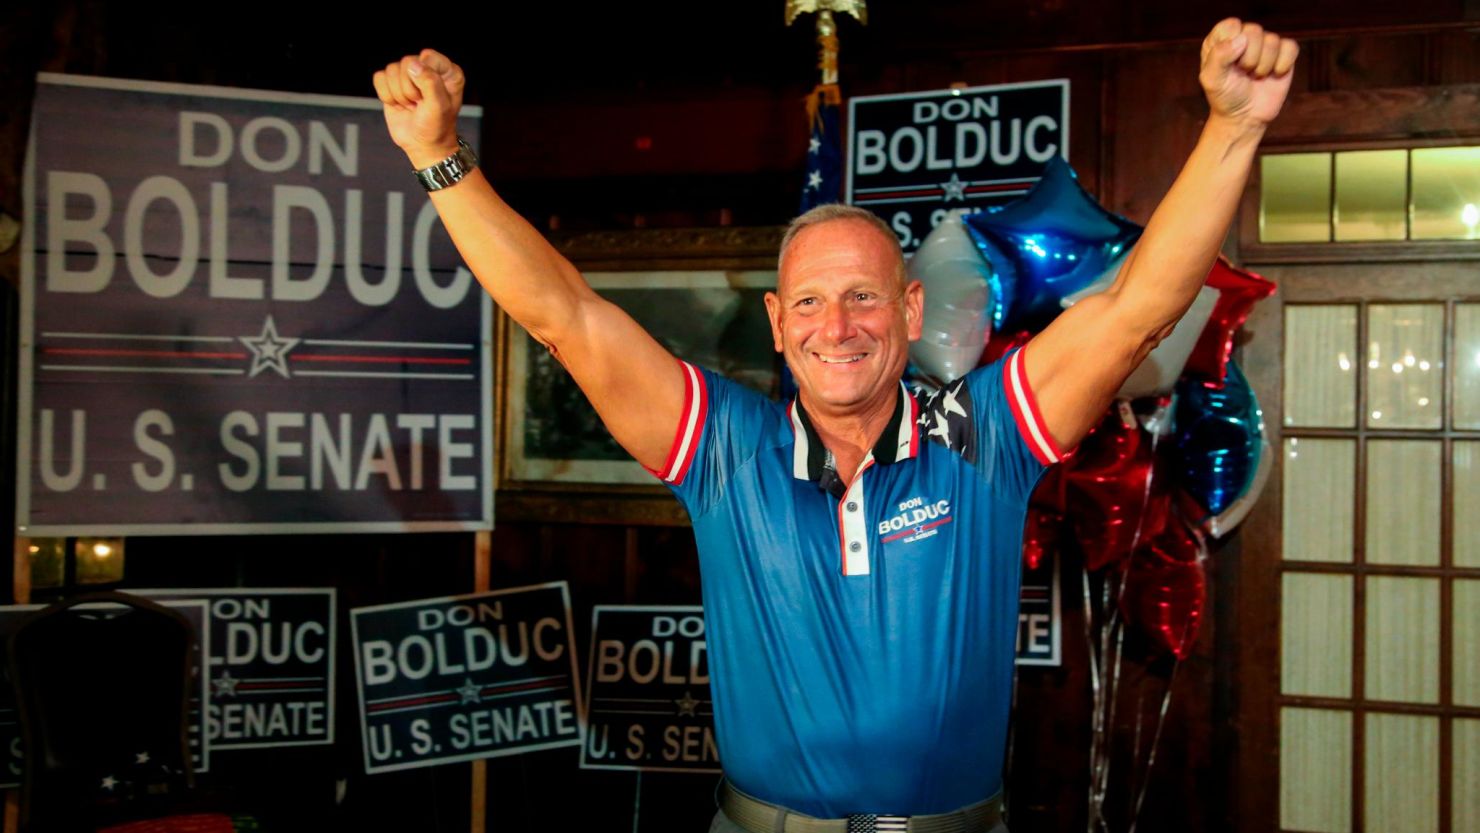 New Hampshire Republican U.S. Senate candidate Don Bolduc smiles during a primary night campaign gathering, Tuesday Sept. 13, 2022, in Hampton, N.H.